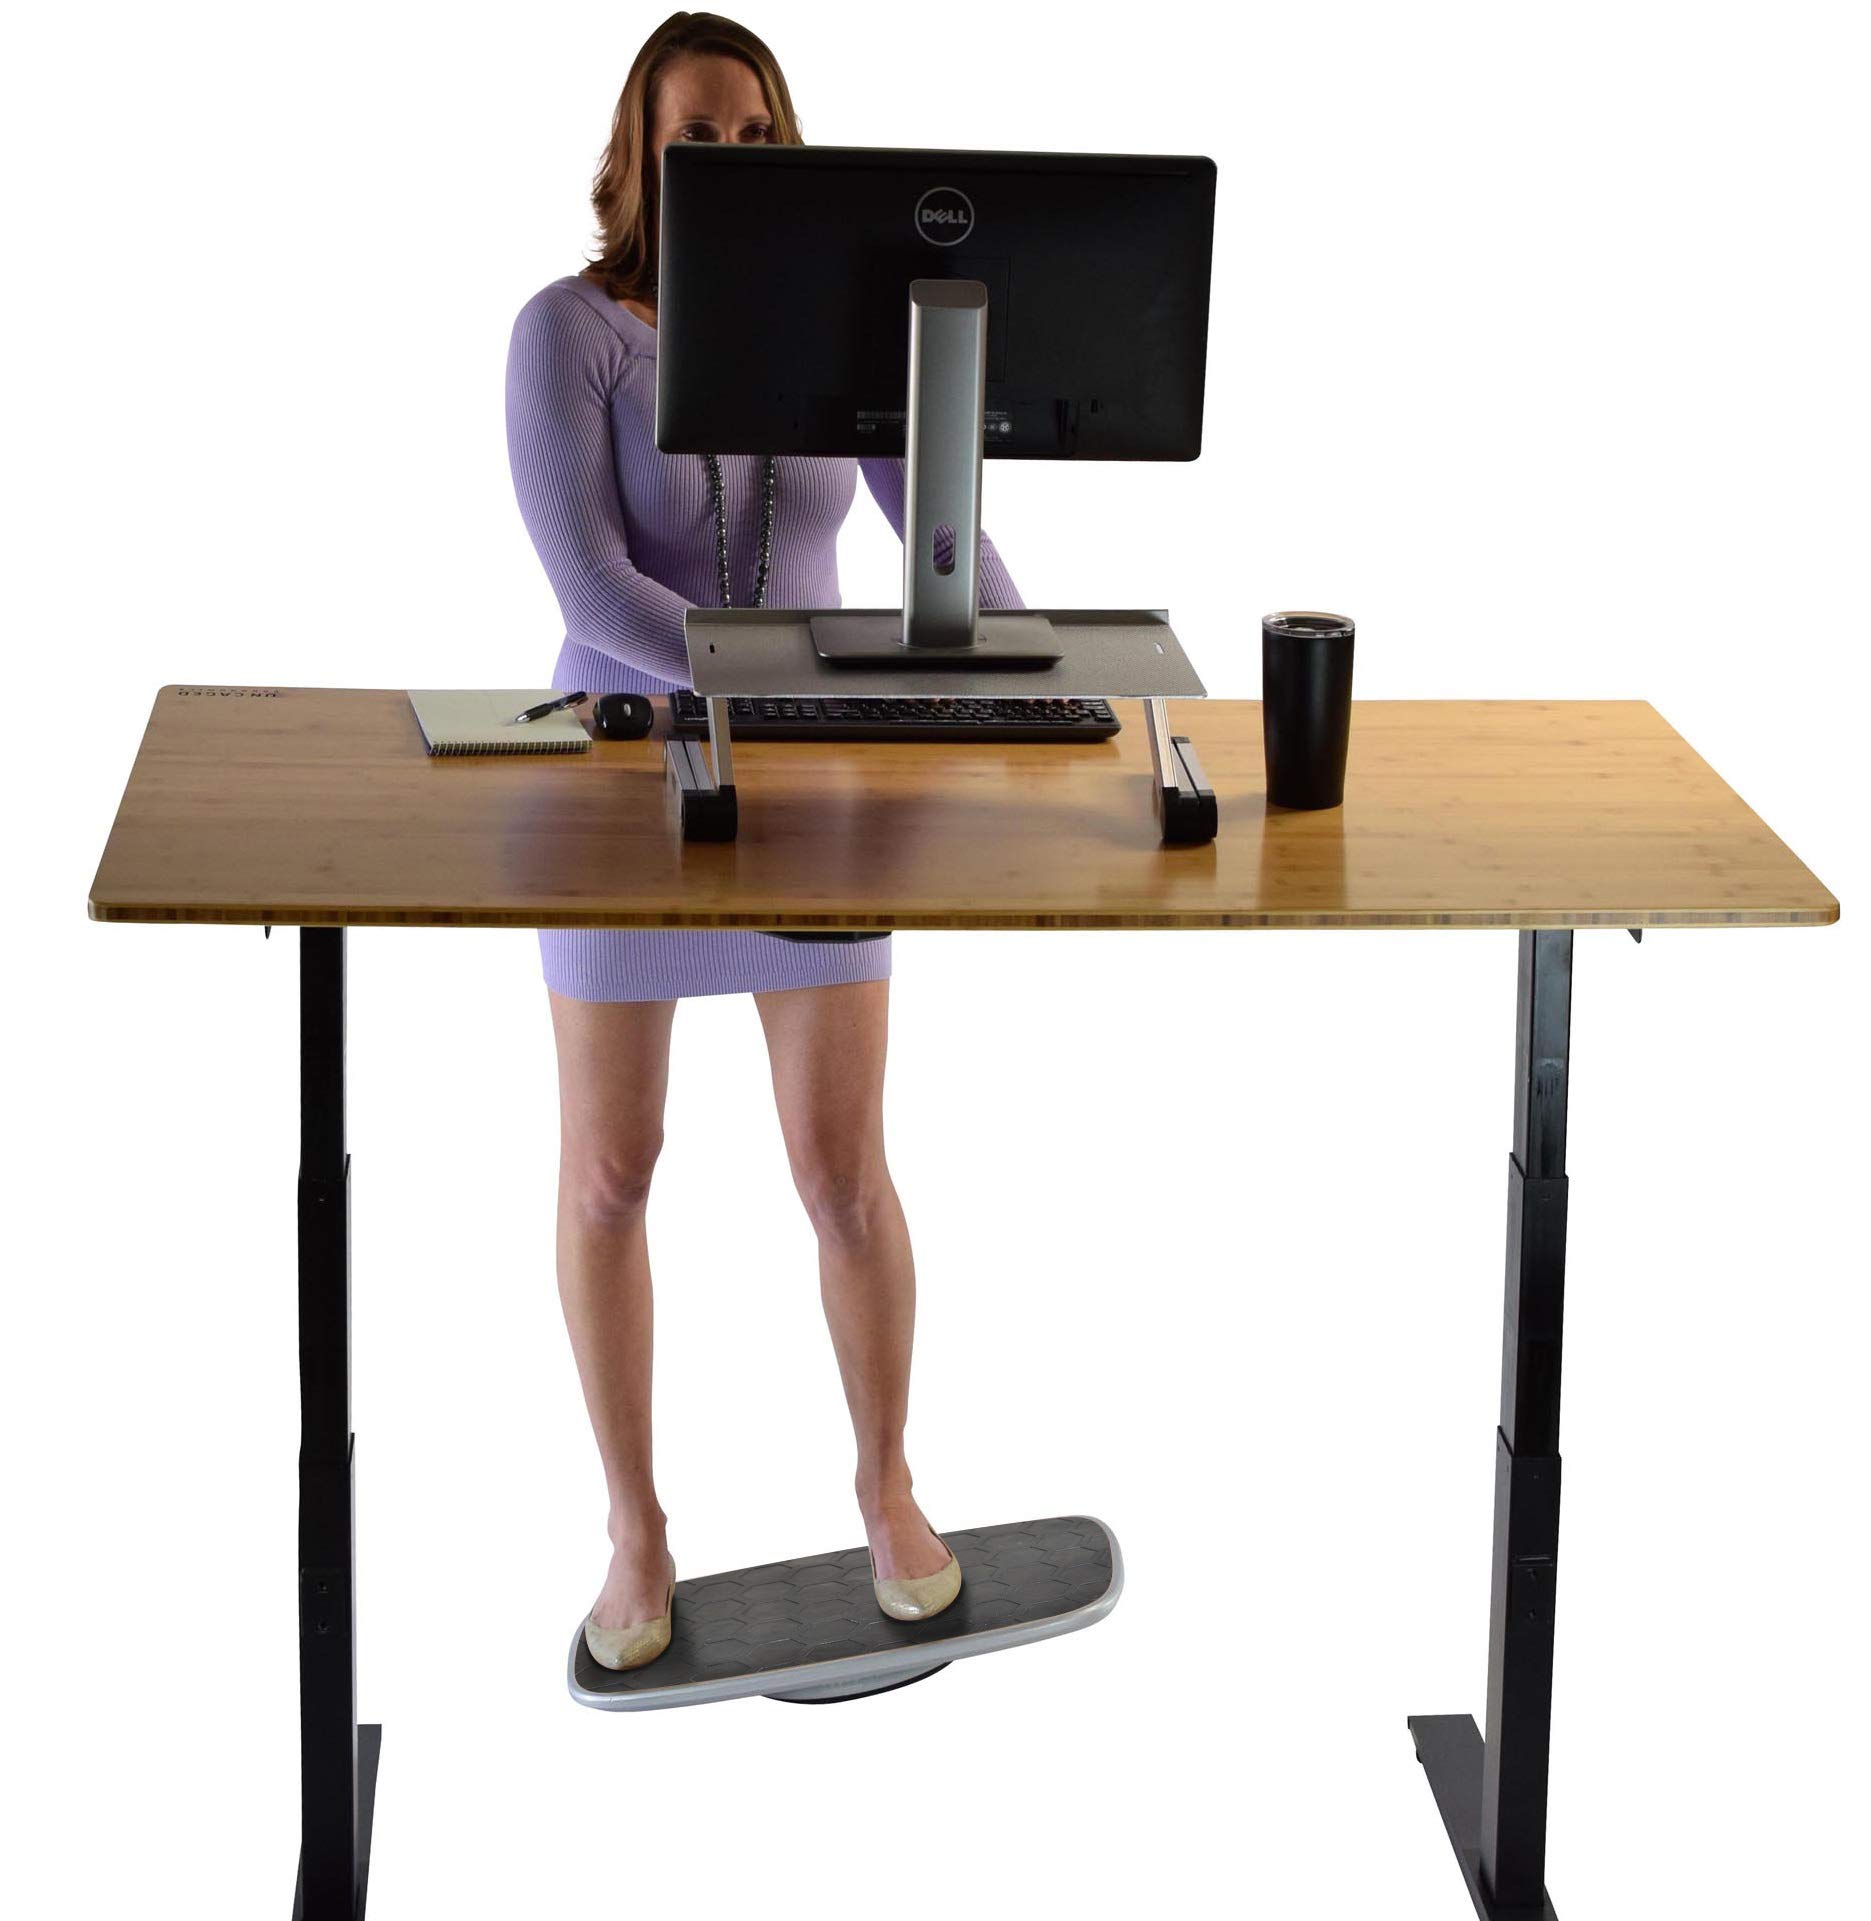 BASE Standing Desk Balance Board with Anti Fatigue Mat Deck gentle 360 motion ergonomic office wobble platform for sit stand up workstations must have standing desk accessories black